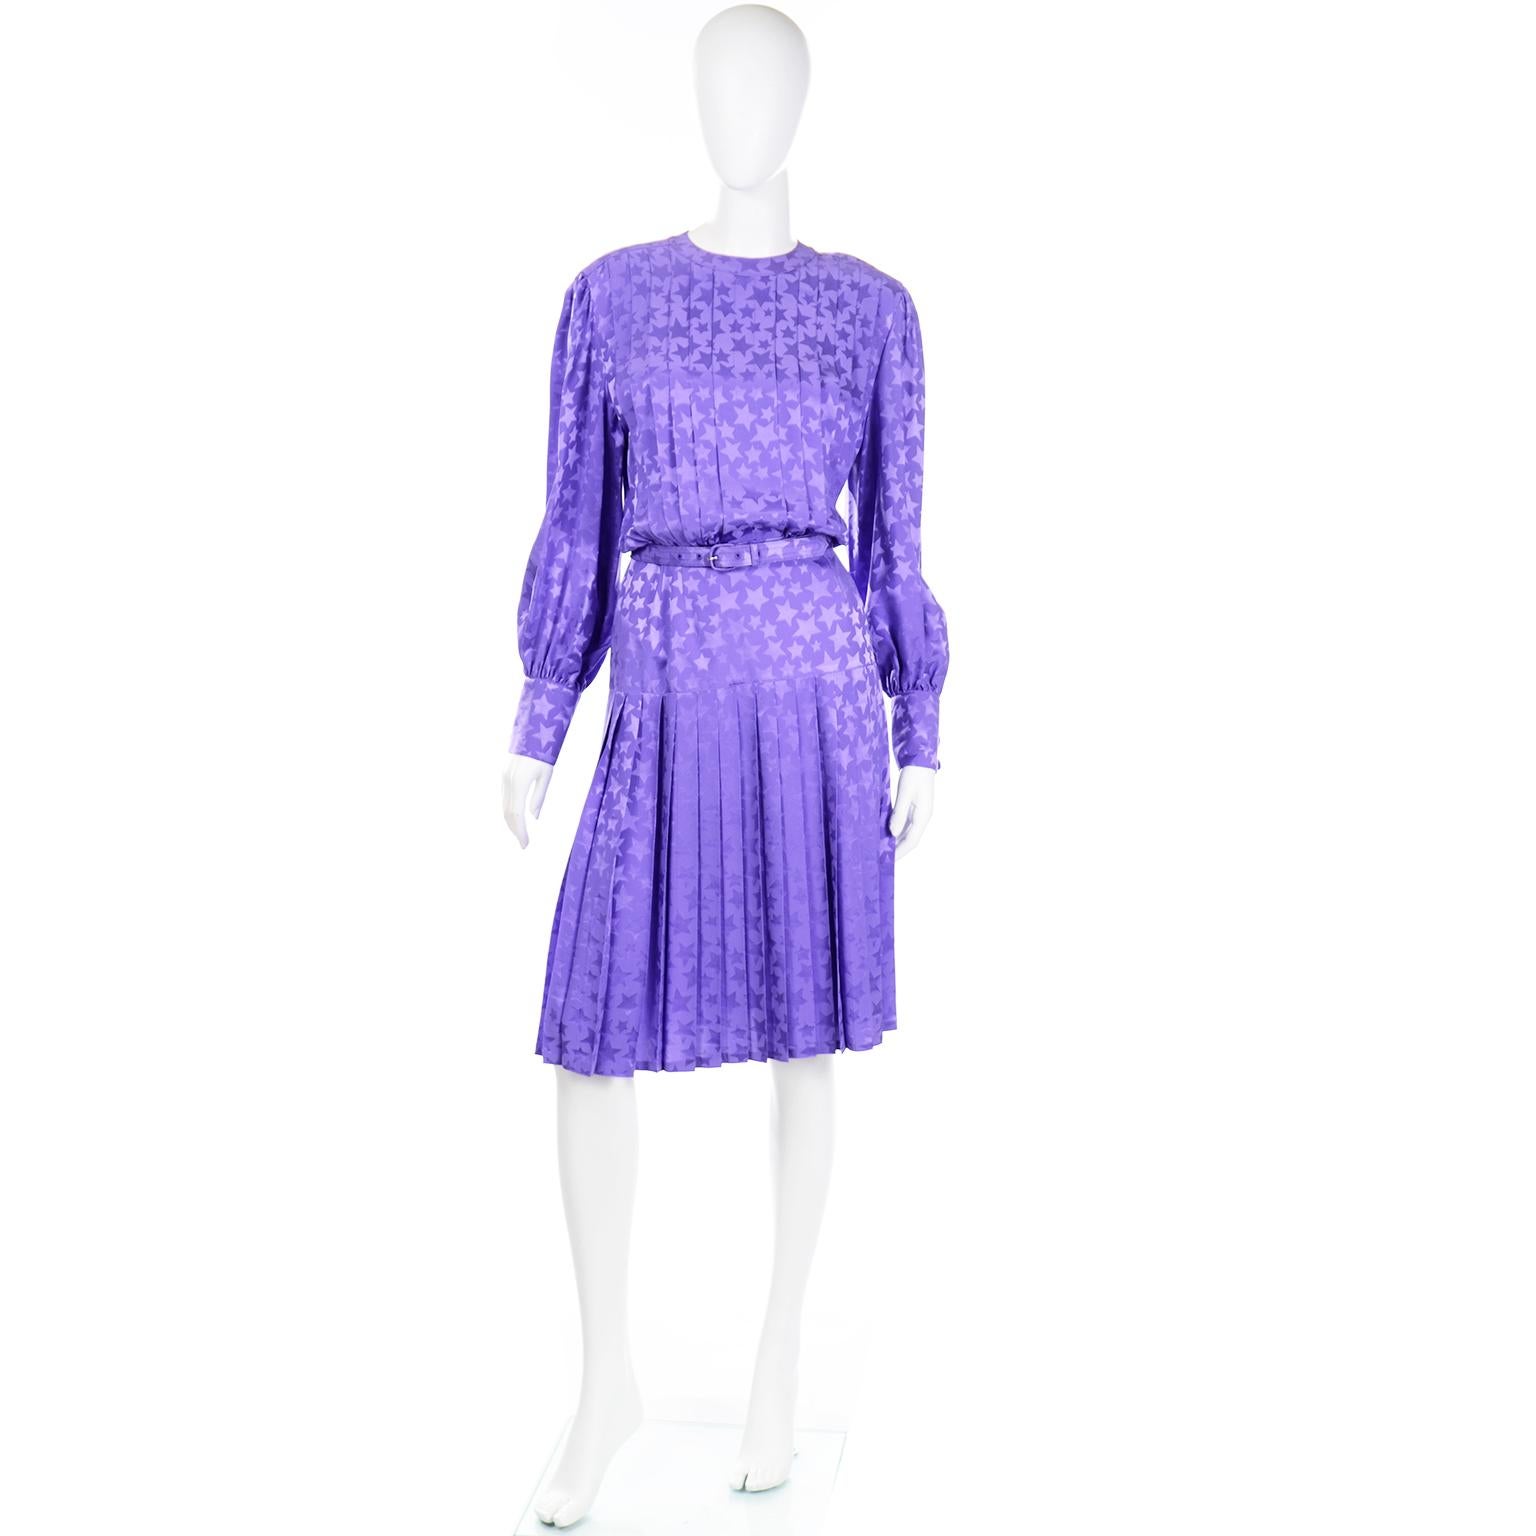 This is a vintage 1980's Adele Simpson purple silk tonal star printed dress. We love vintage Adele Simpson dresses and this one would be perfect to wear out to a nice day event or to a wedding as a guest.  There is a pretty pleated skirt and a wide,